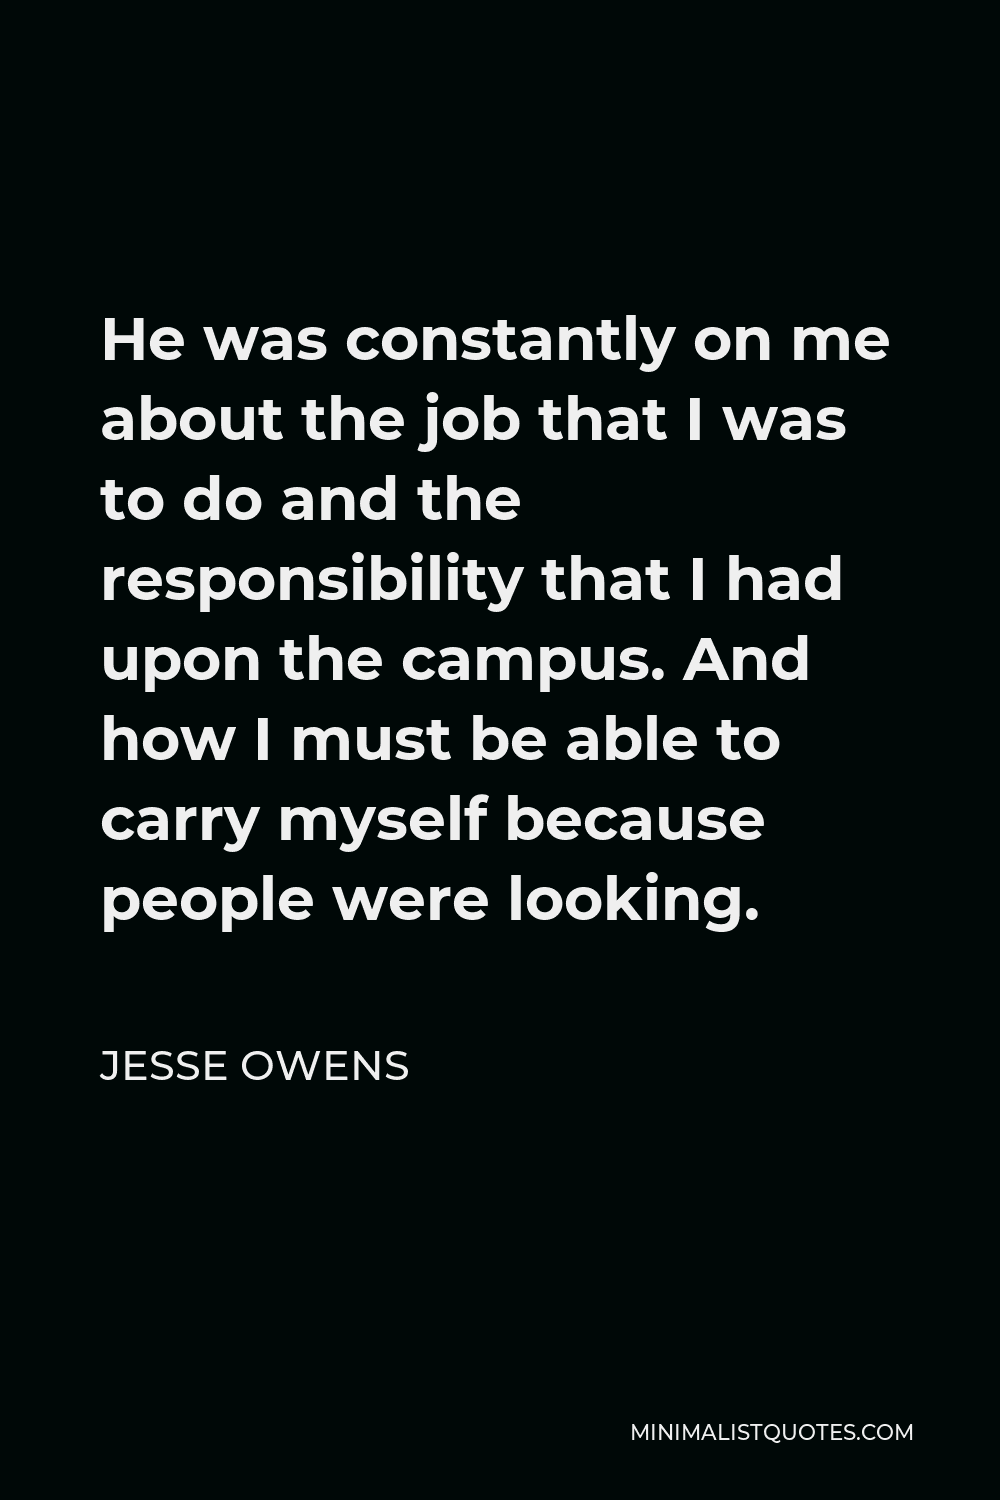 Jesse Owens Quote - He was constantly on me about the job that I was to do and the responsibility that I had upon the campus. And how I must be able to carry myself because people were looking.